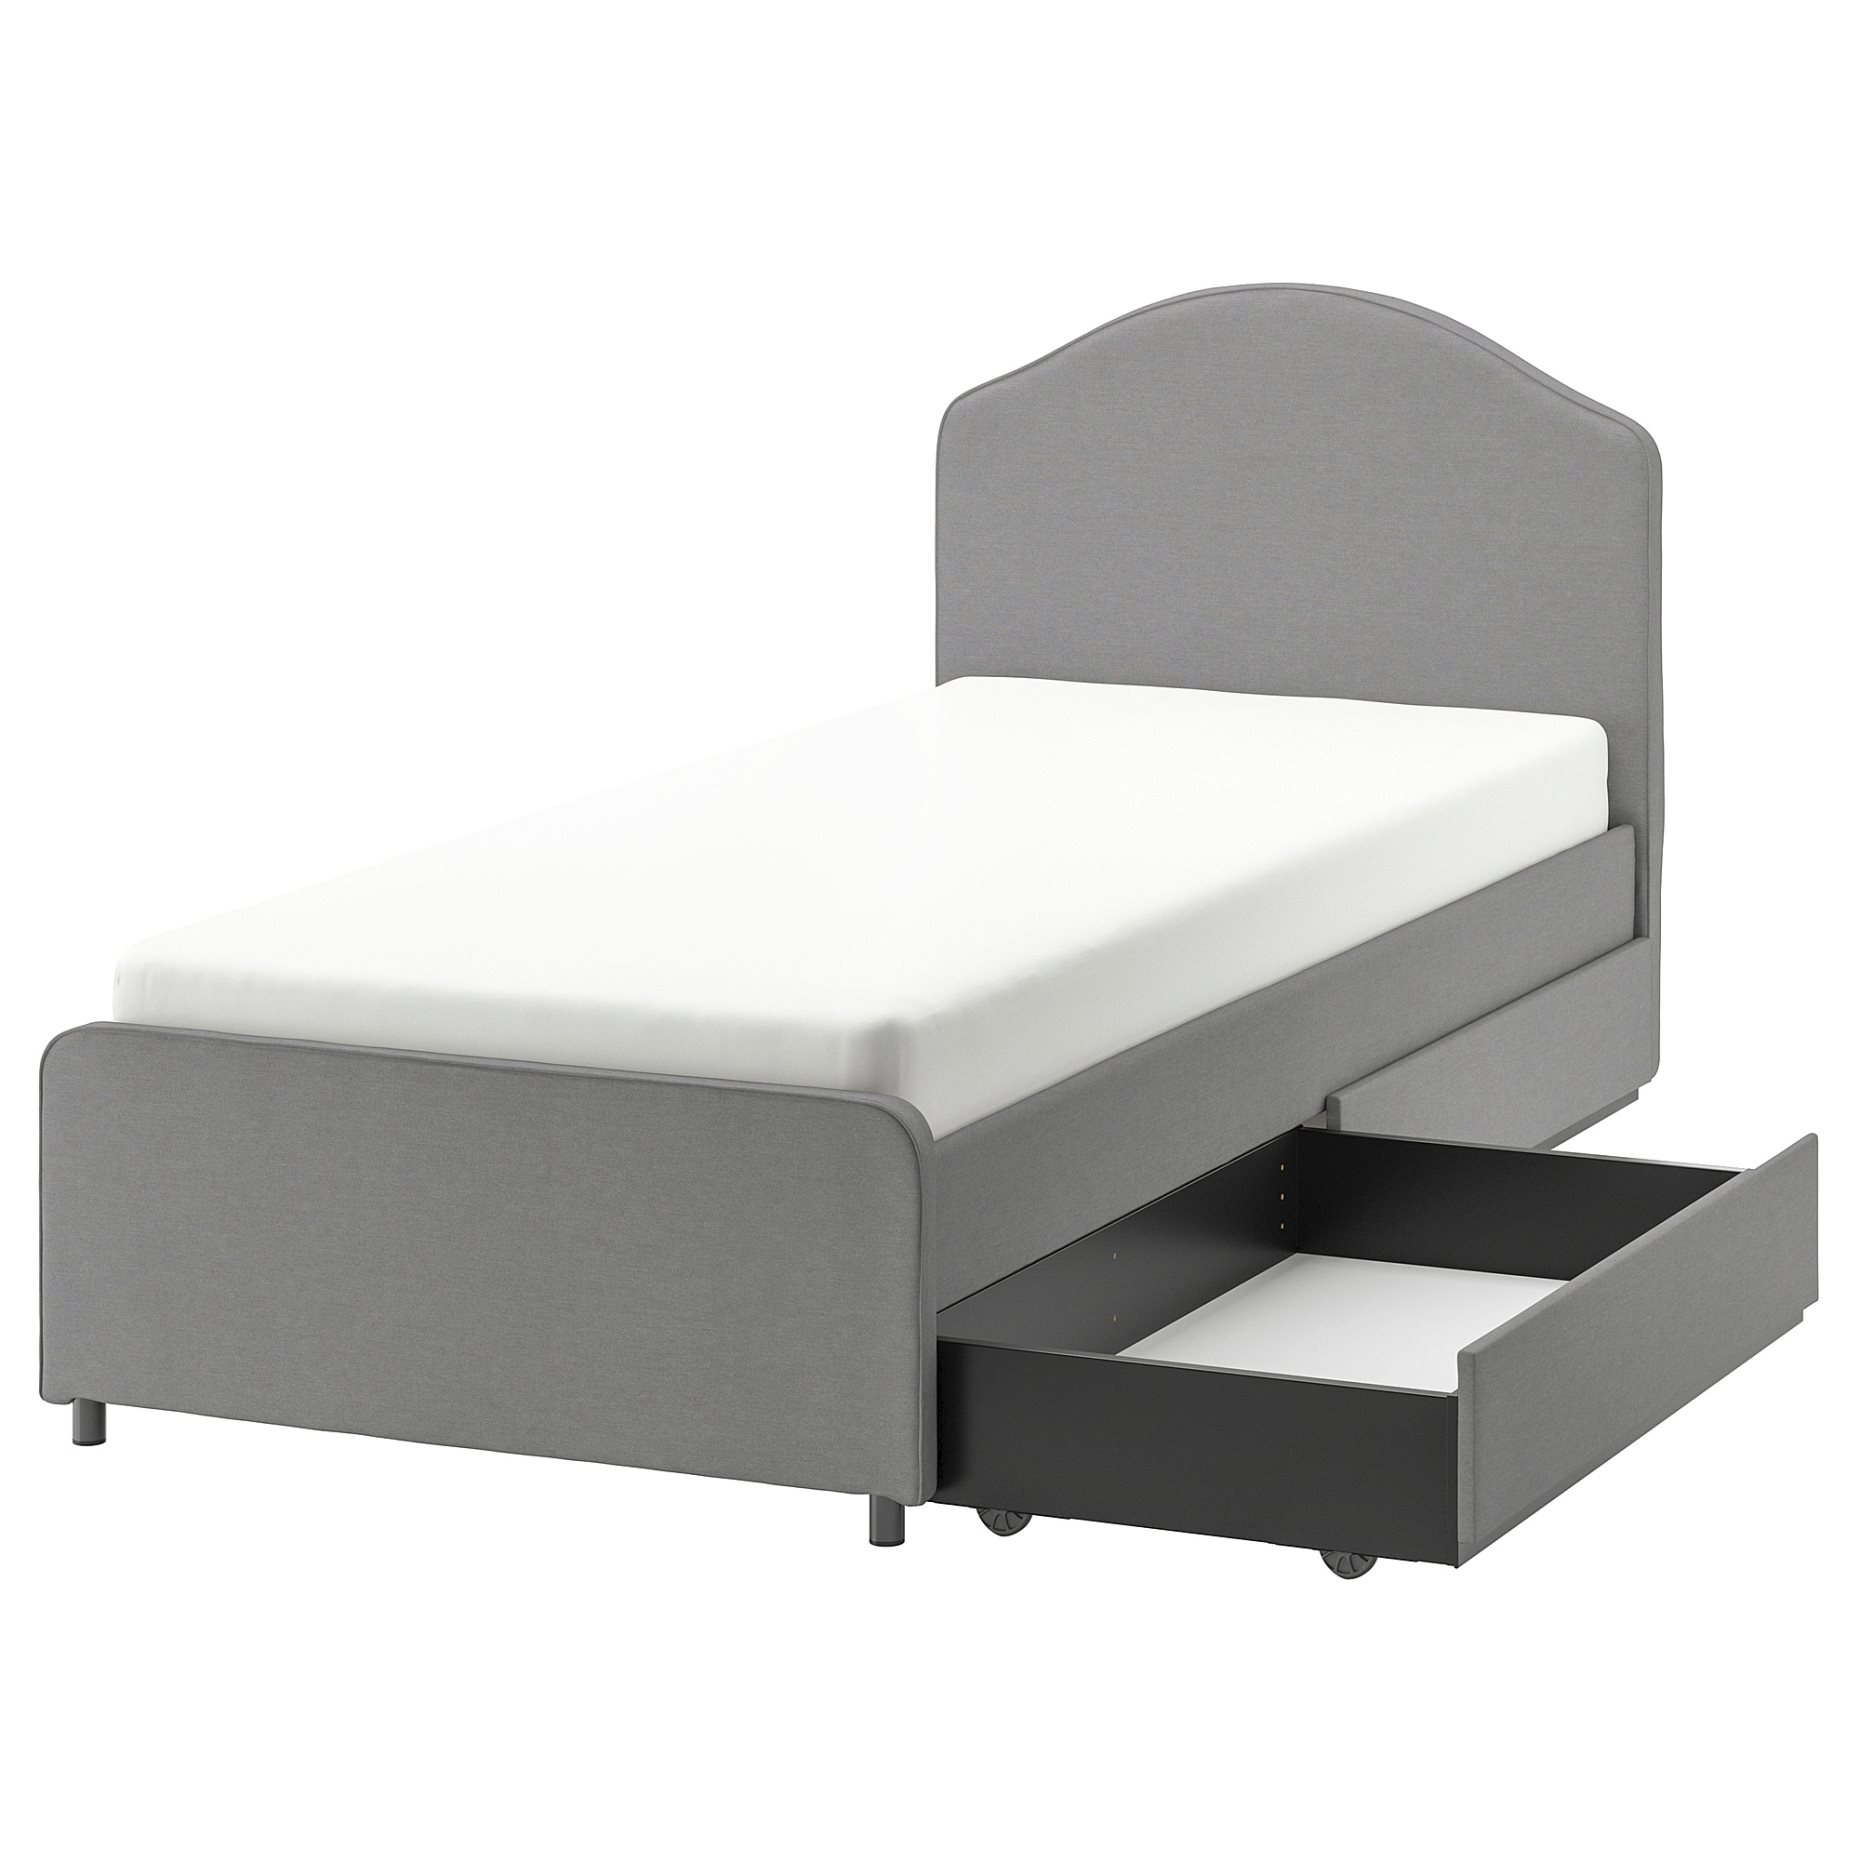 HAUGA, upholstered bed/2 storage boxes, 90x200 cm, 593.365.95